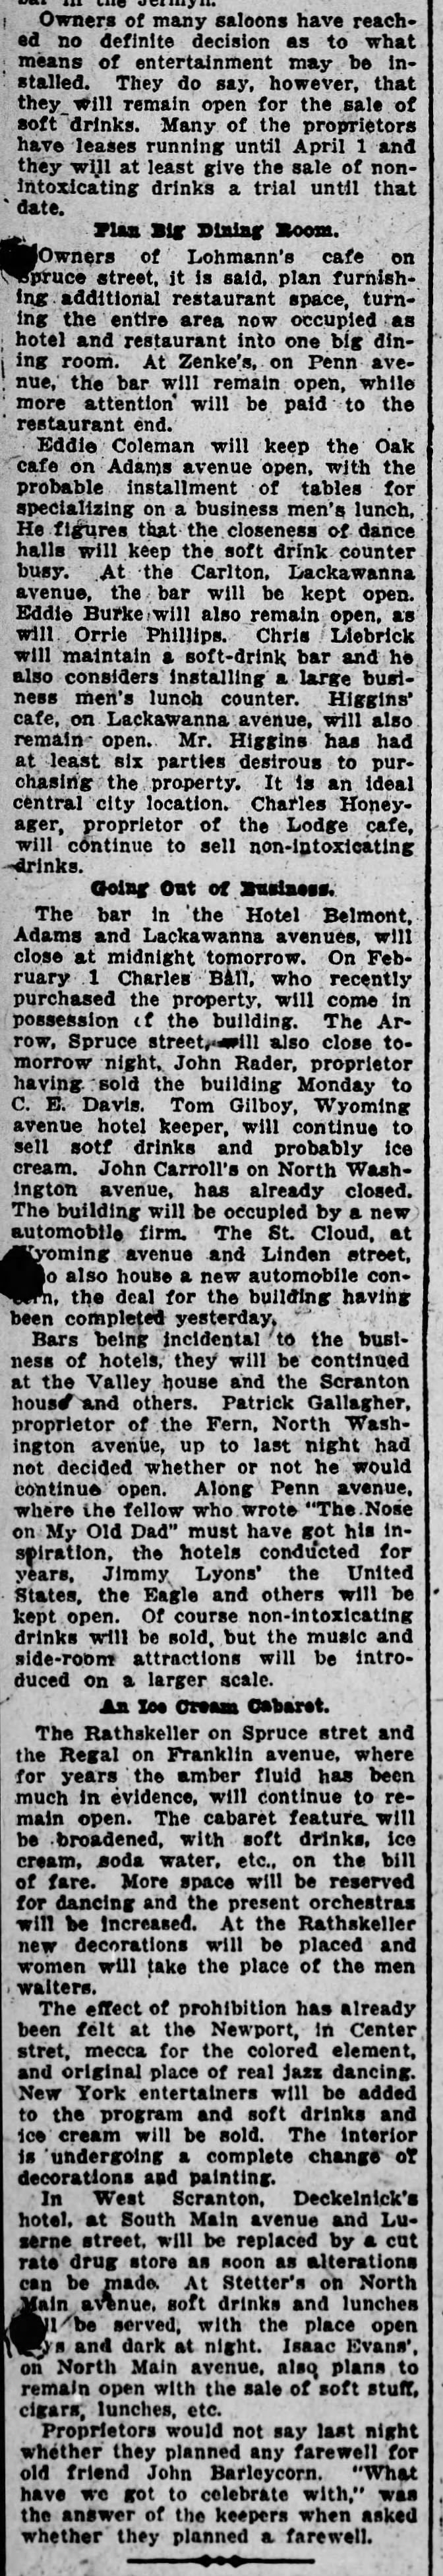 PWC Local Bars Oak Cafe Adjust to Prohibition Scr Rep Jan 15 1920 pg 13